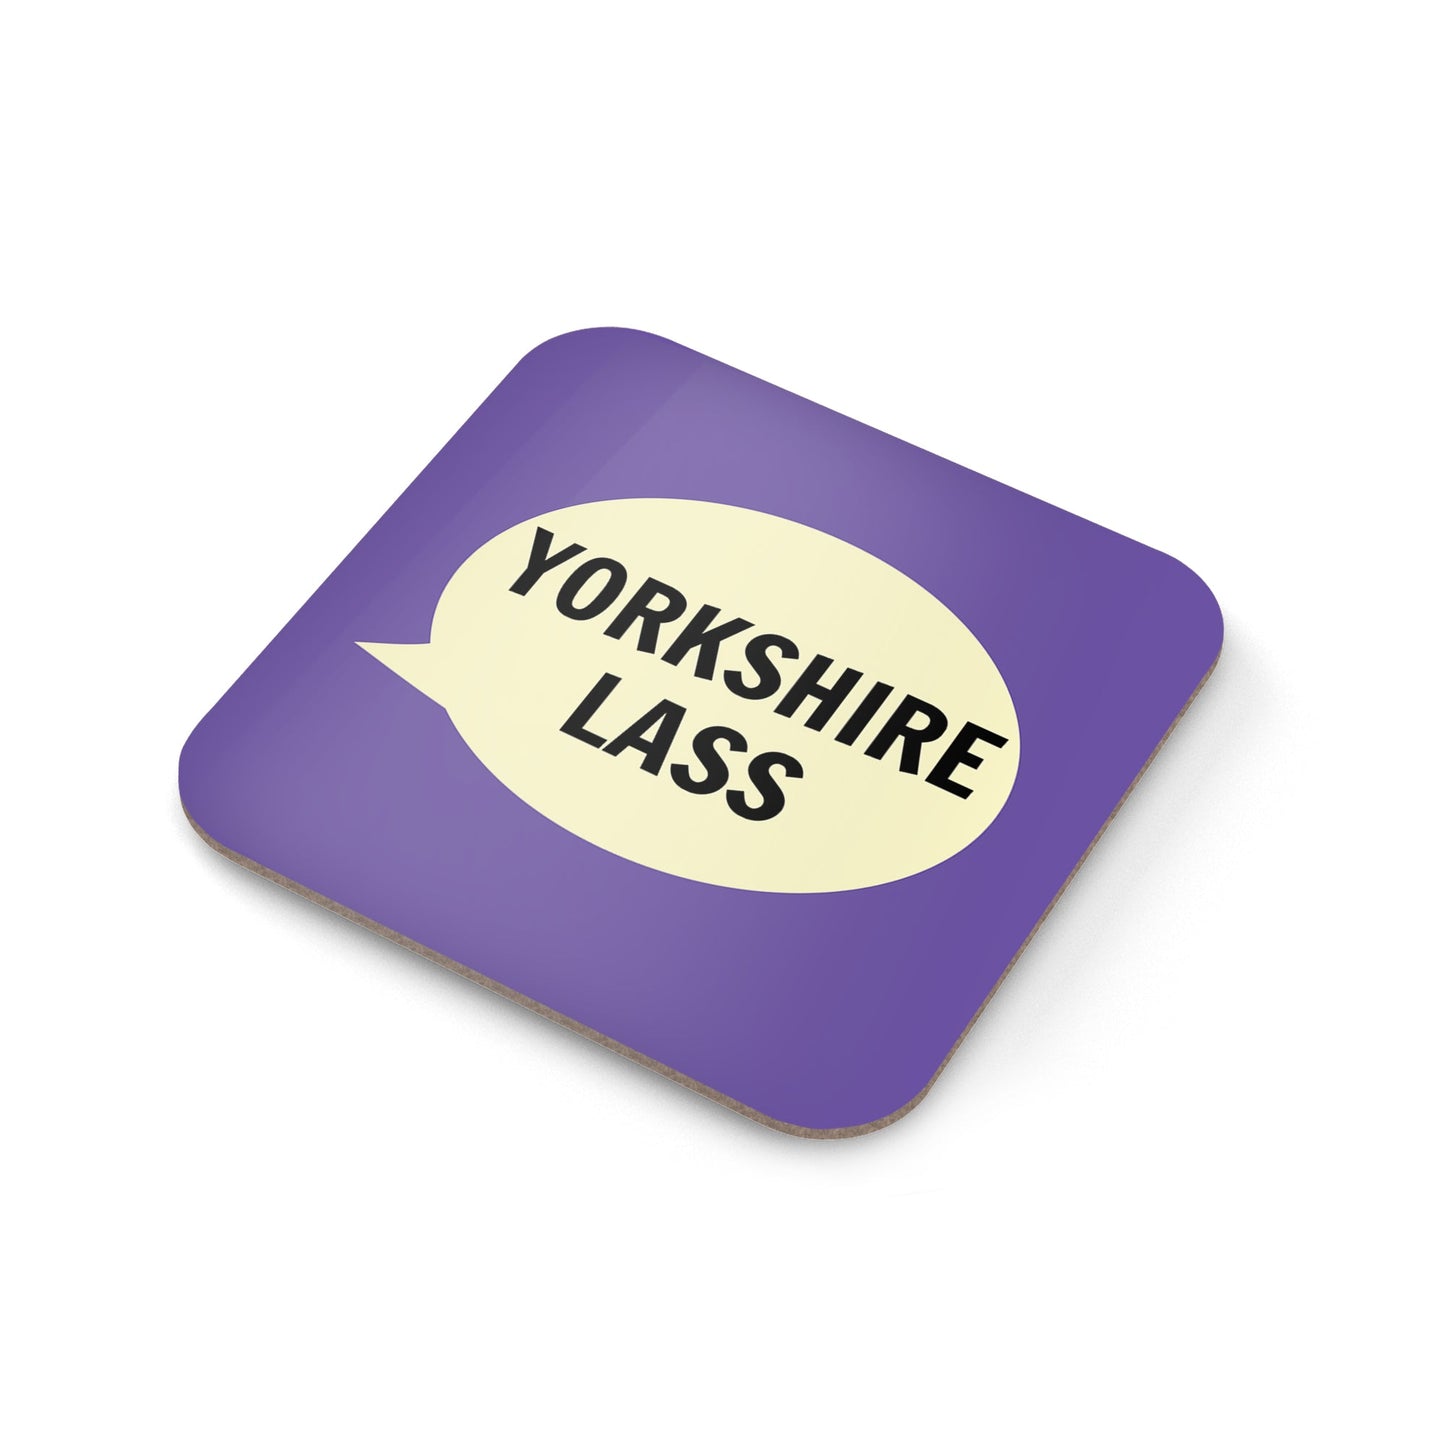 Yorkshire Lass Coaster - The Great Yorkshire Shop